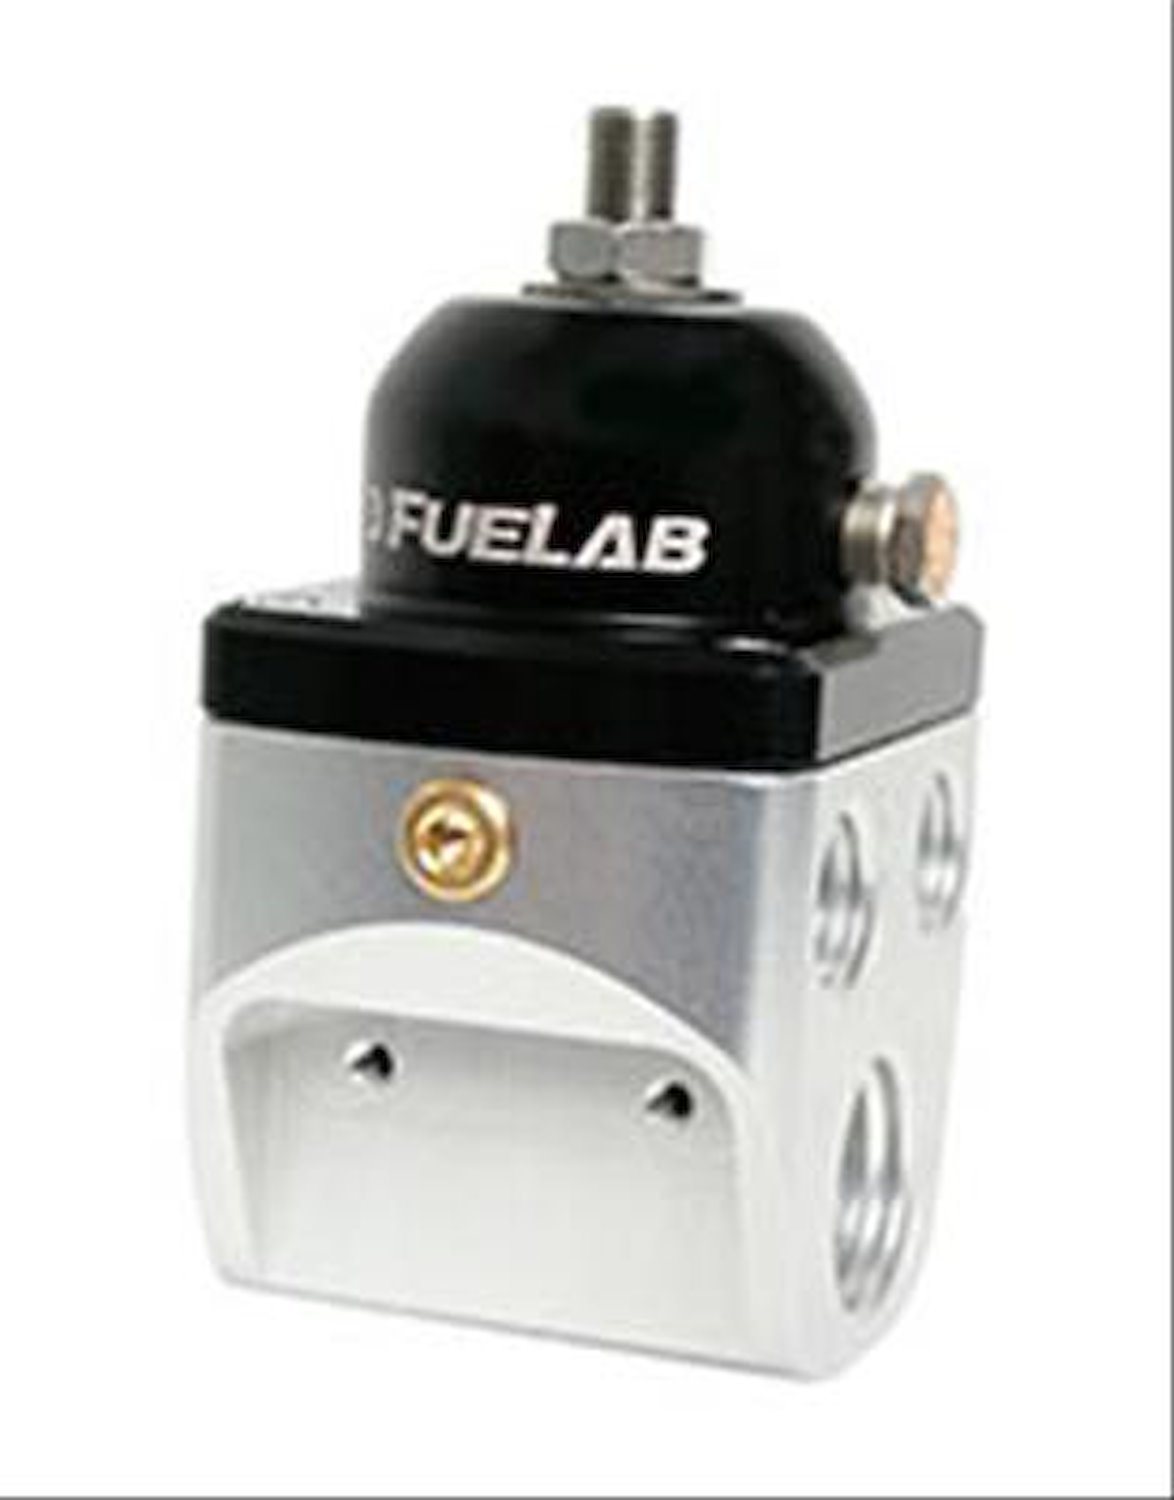 Universal CARB Adjustable Fuel Pressure Regulator 4 Port Blocking Style 4-12 psi 2 -10AN Inlet 4 -6AN Outlets